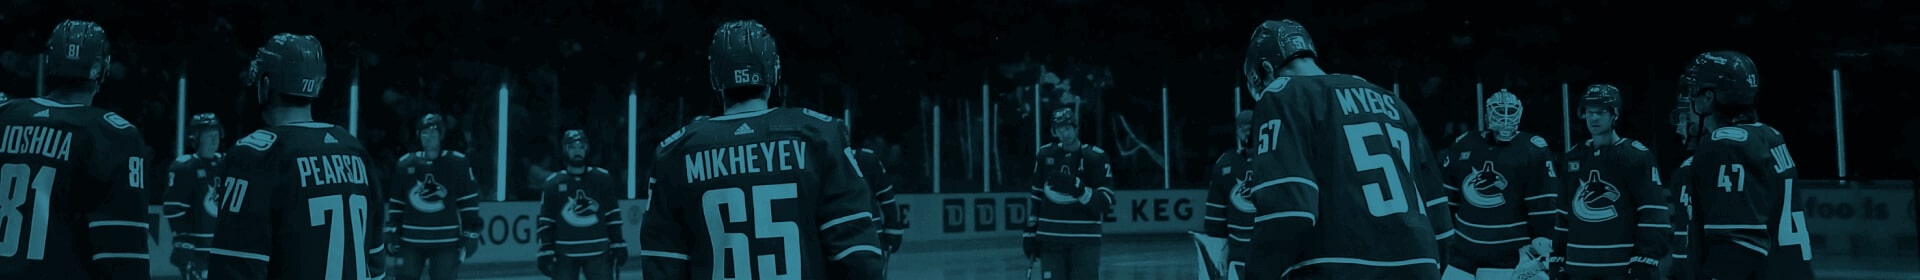 PlayNow.com has the Canucks as Playoff Underdogs